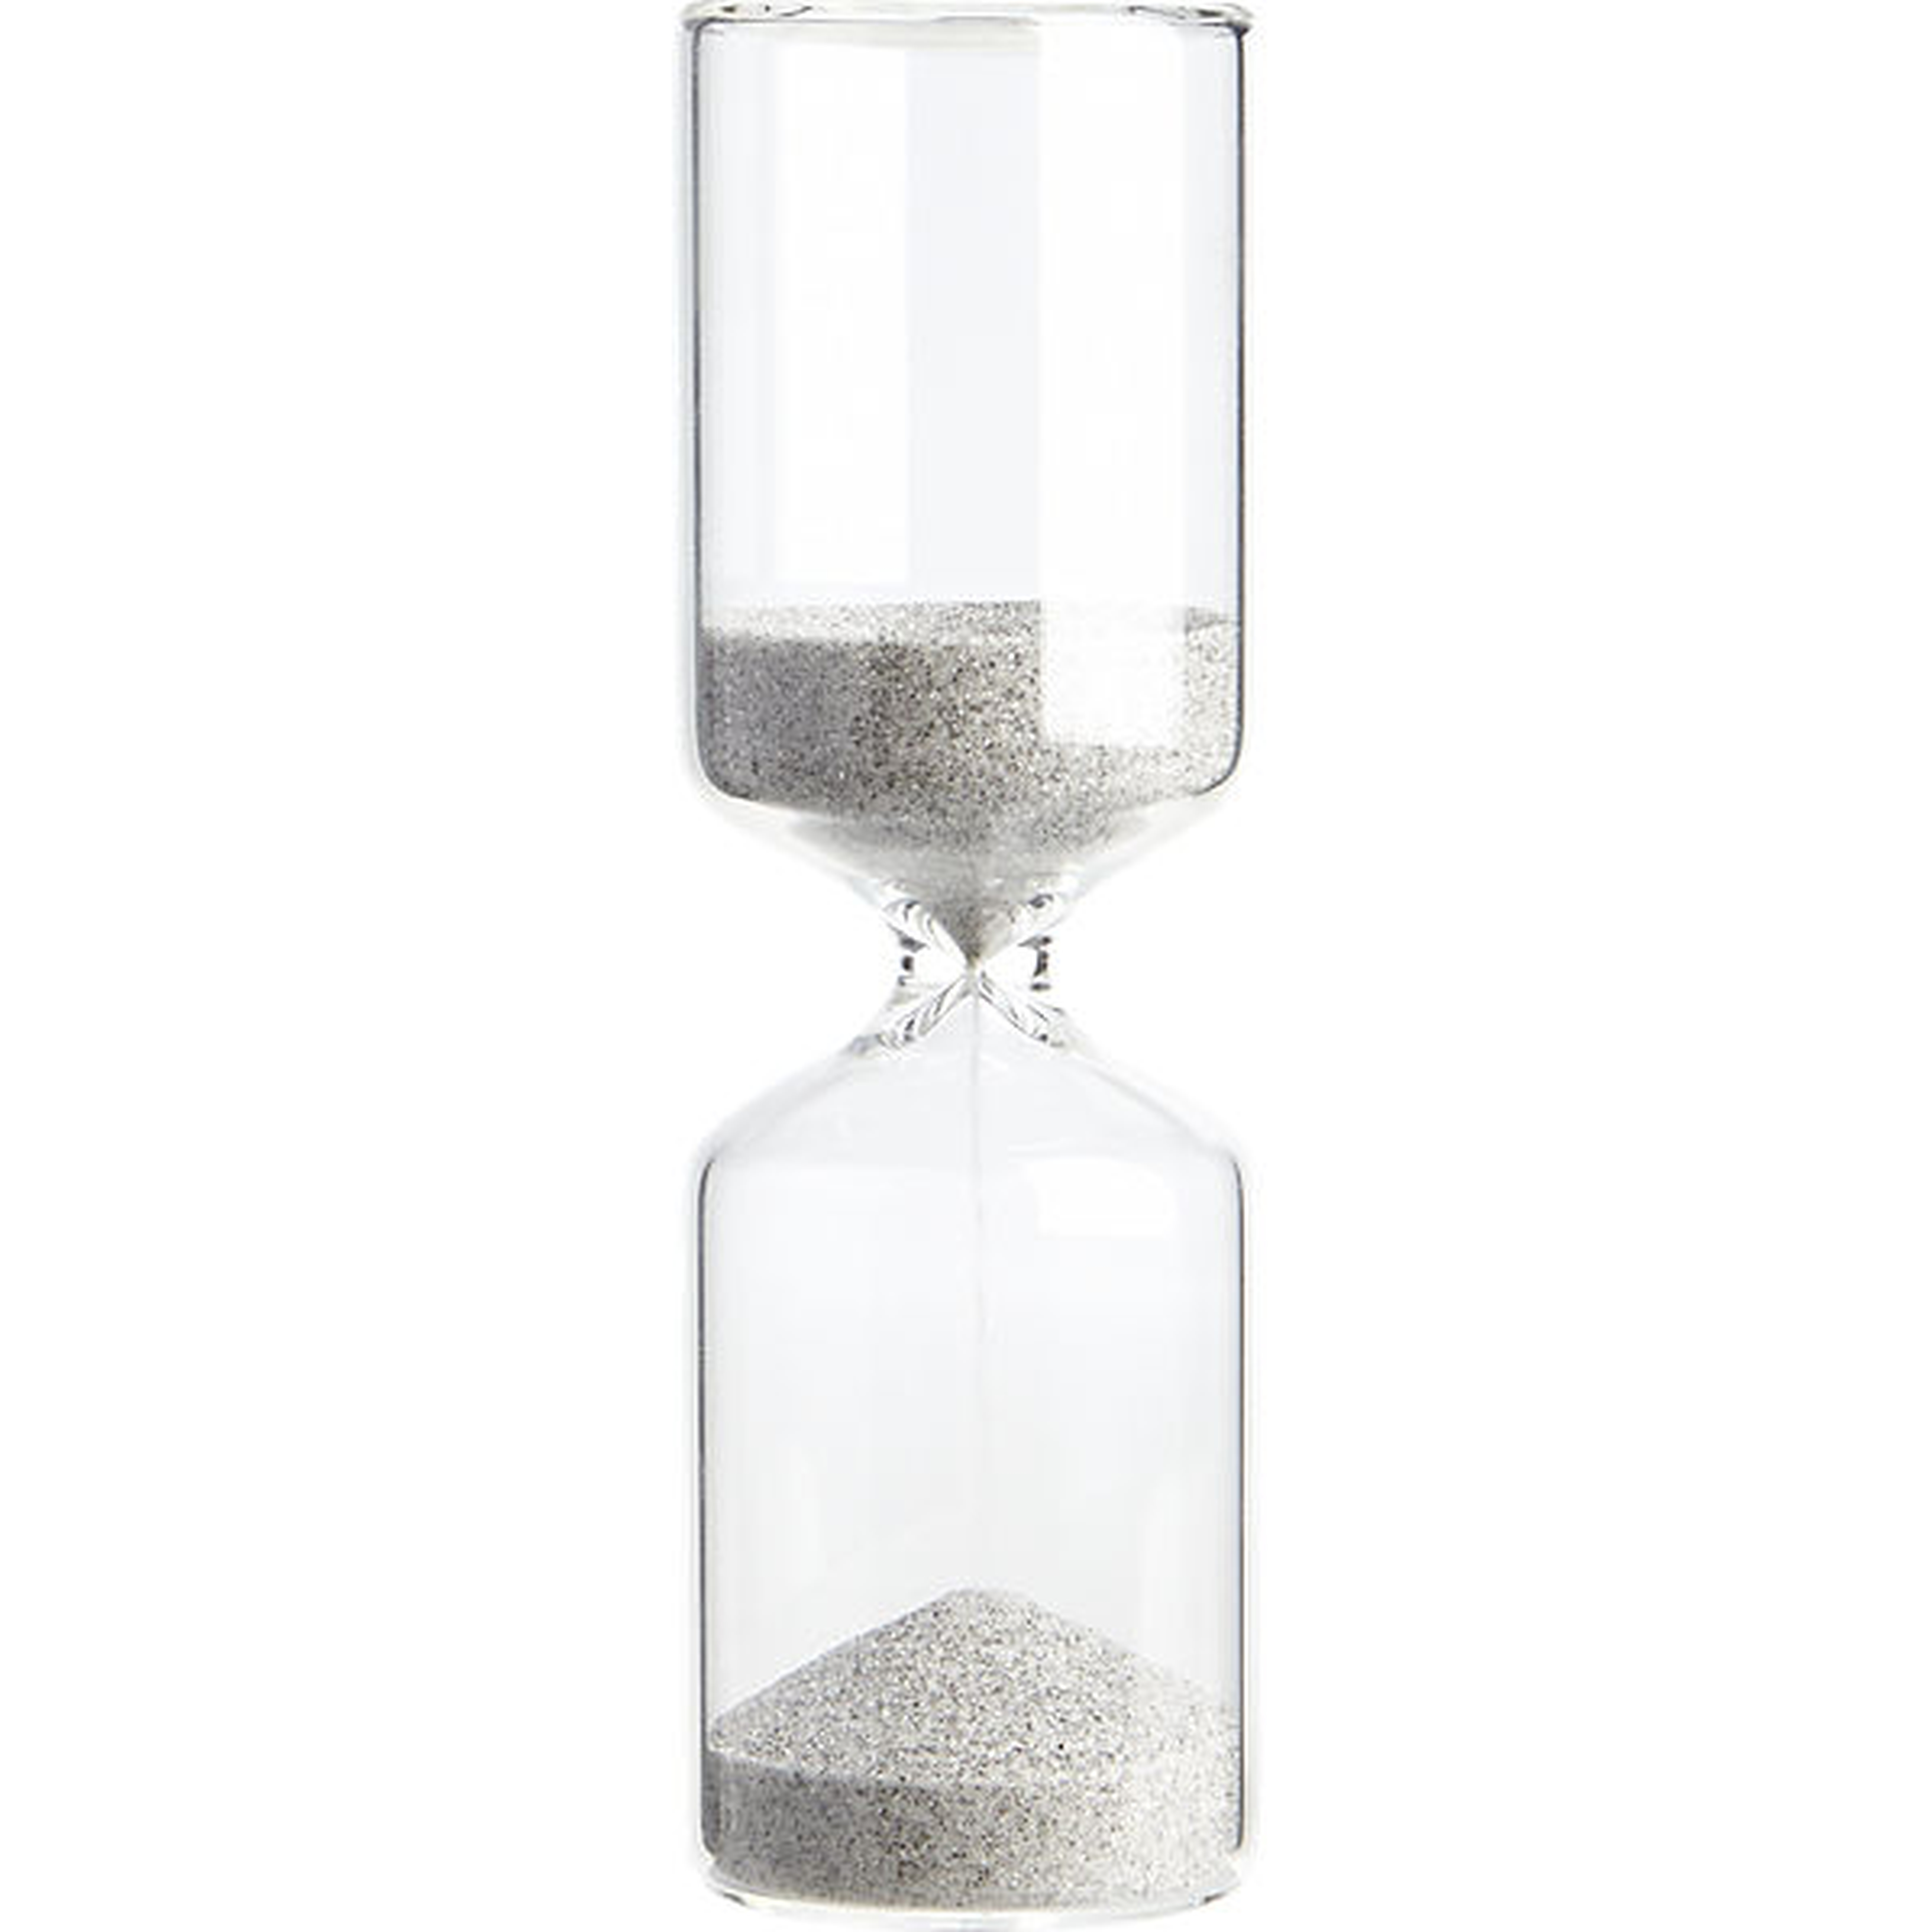 (DISCONTINUED) 15-minute black and white hourglass - CB2